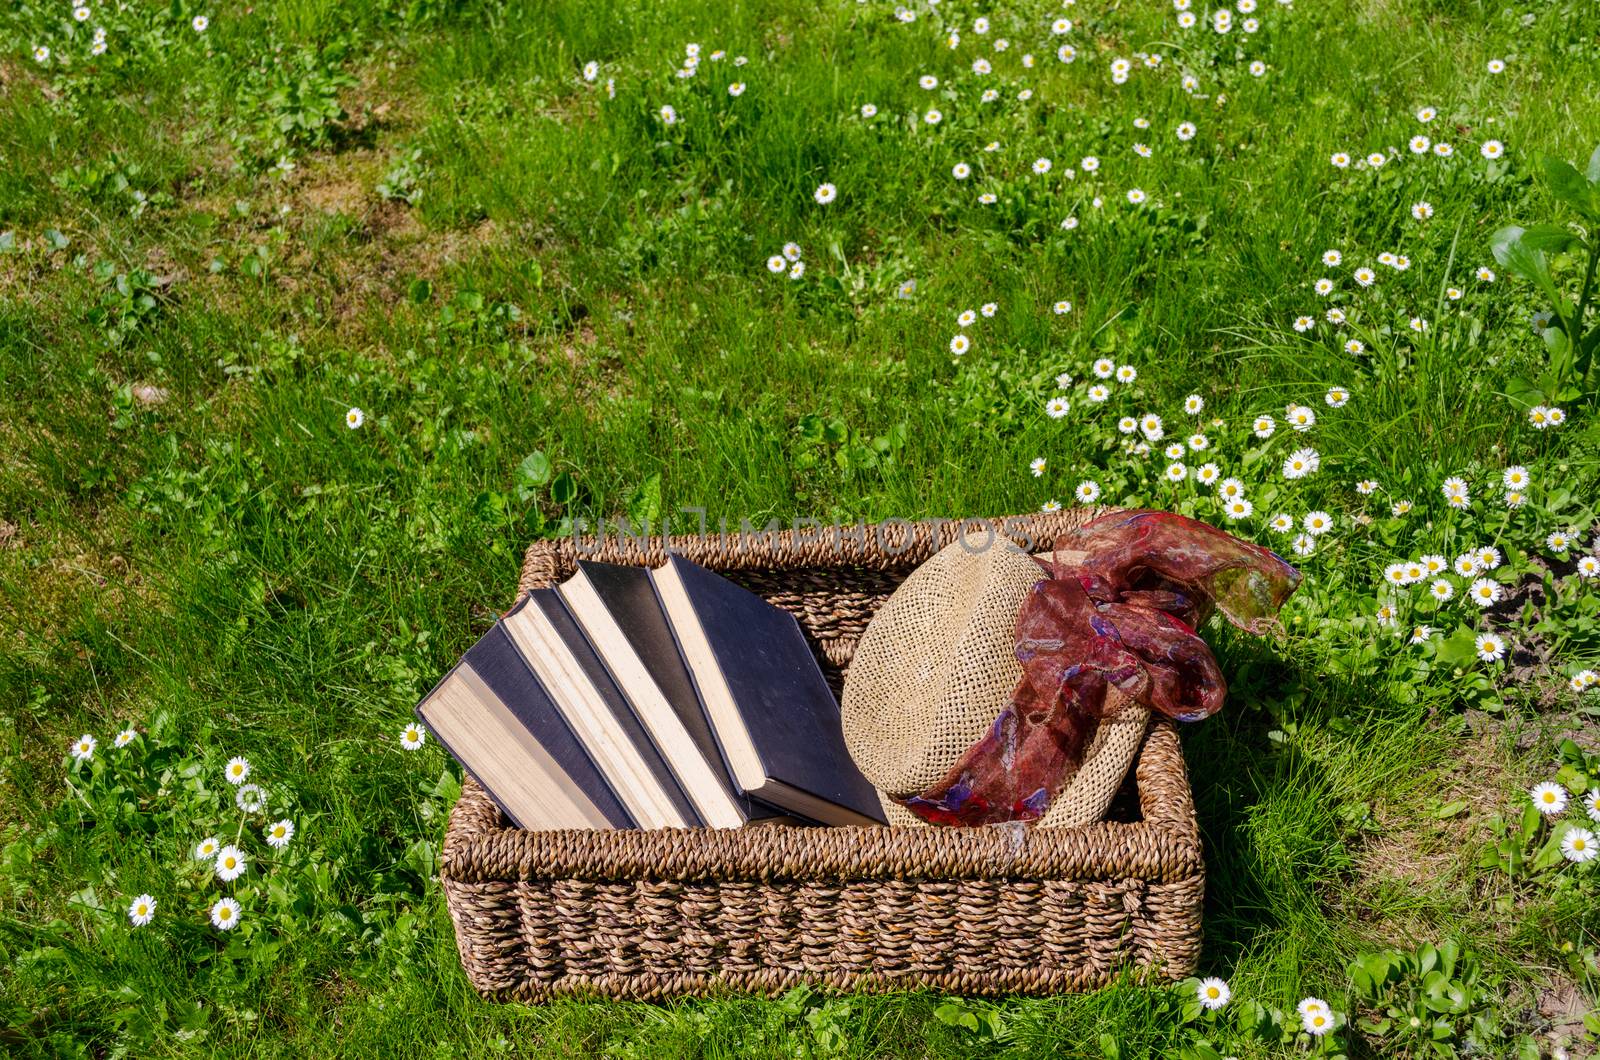 Wicker basket full of books between lawn and daisy flowers and retro hat.